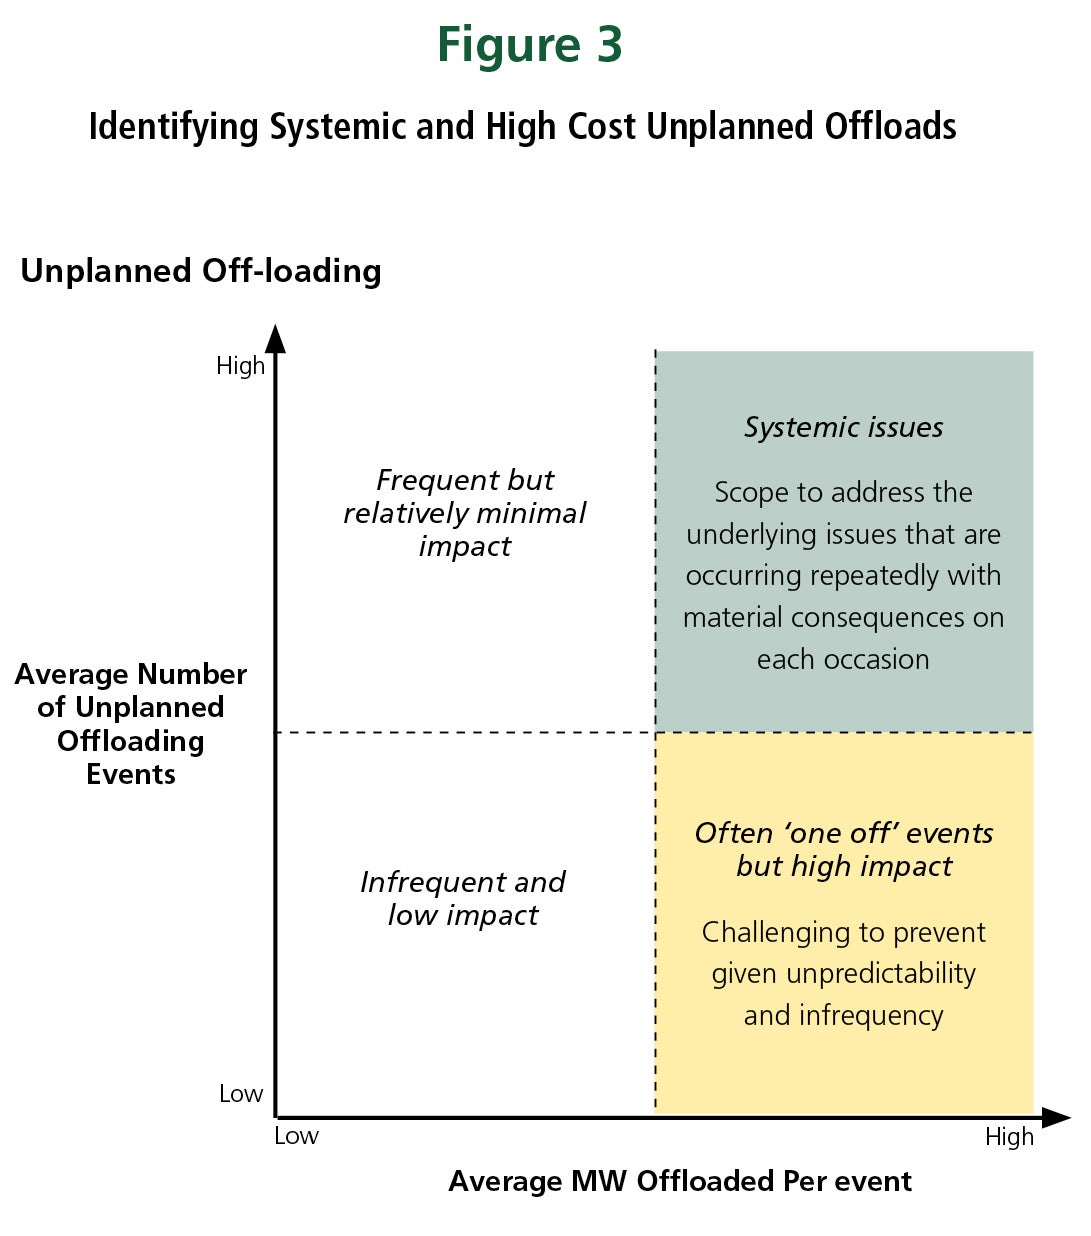 Identifying Systemic and High Cost Unplanned Offloads